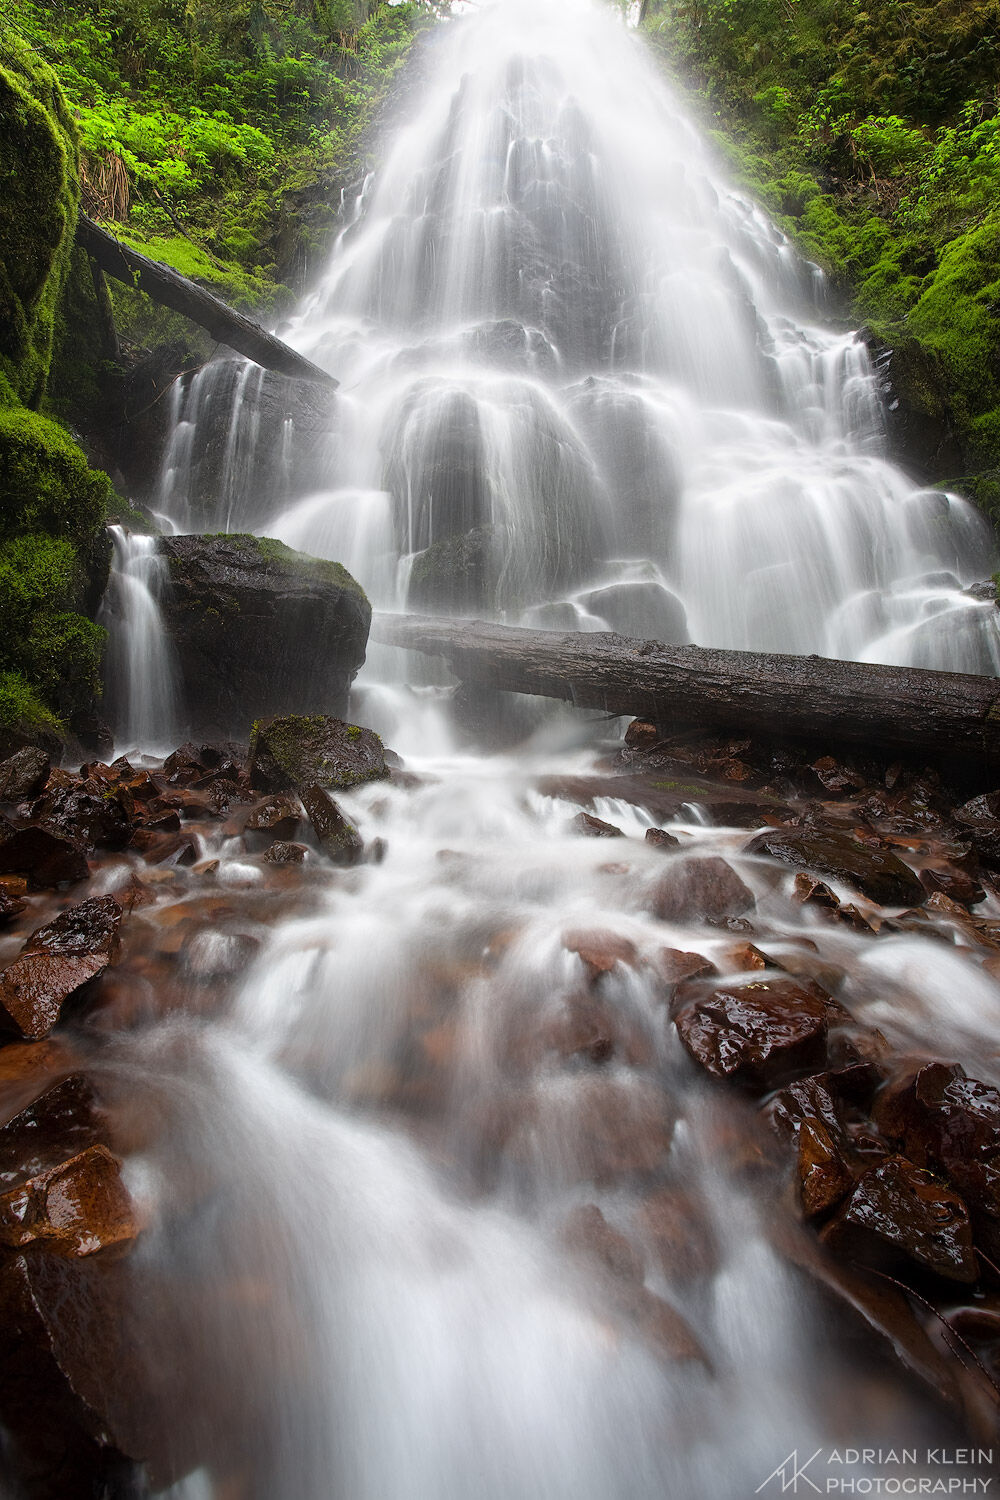 The small yet magically beautiful Fair Falls in the Columbia River Gorge, Oregon.